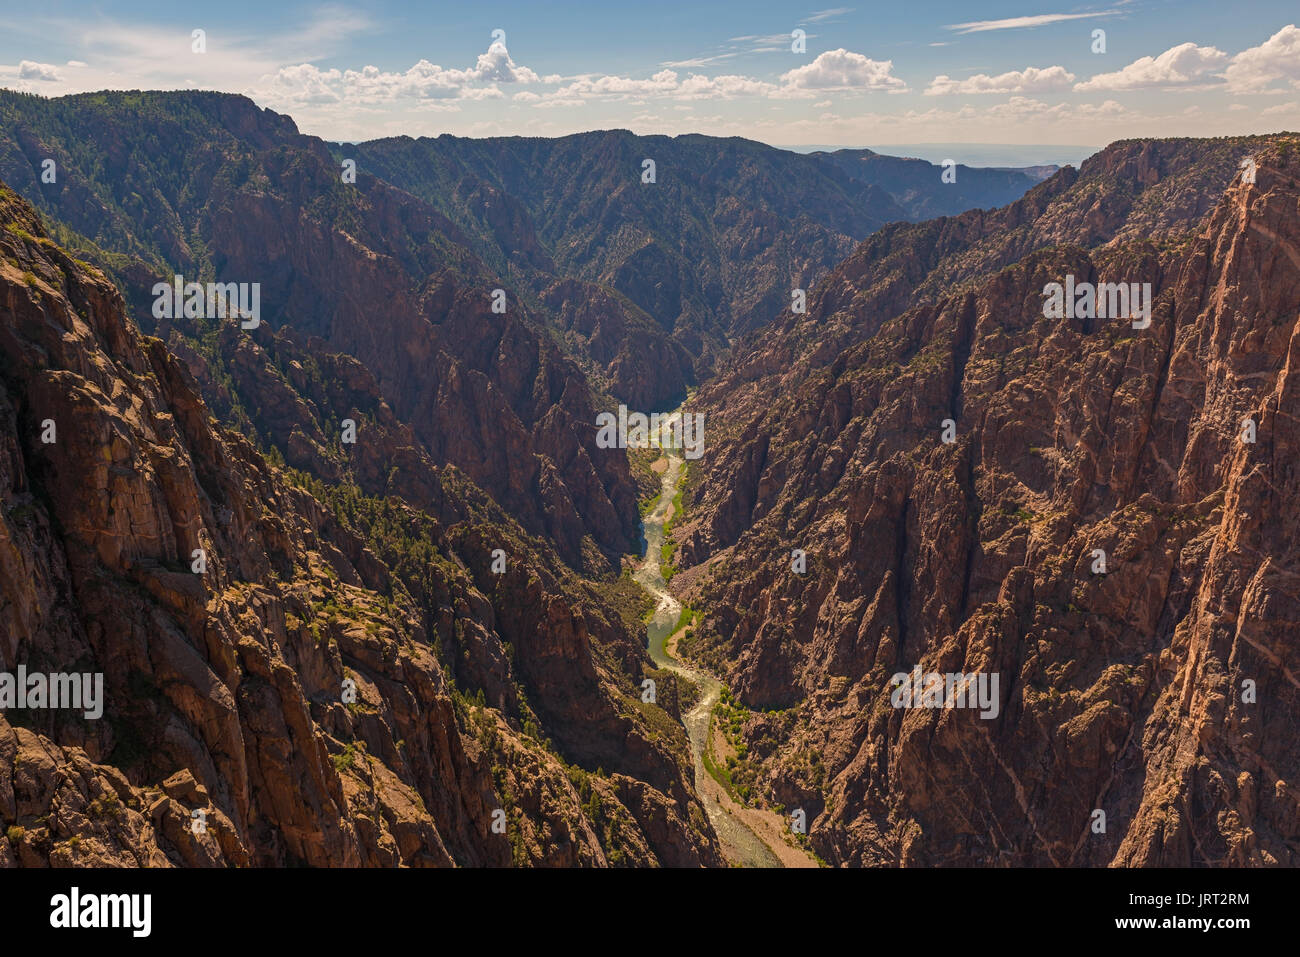 Majestic landscape of the Black Canyon of the Gunnison River in the same name national park in the state of Colorado, USA. Stock Photo